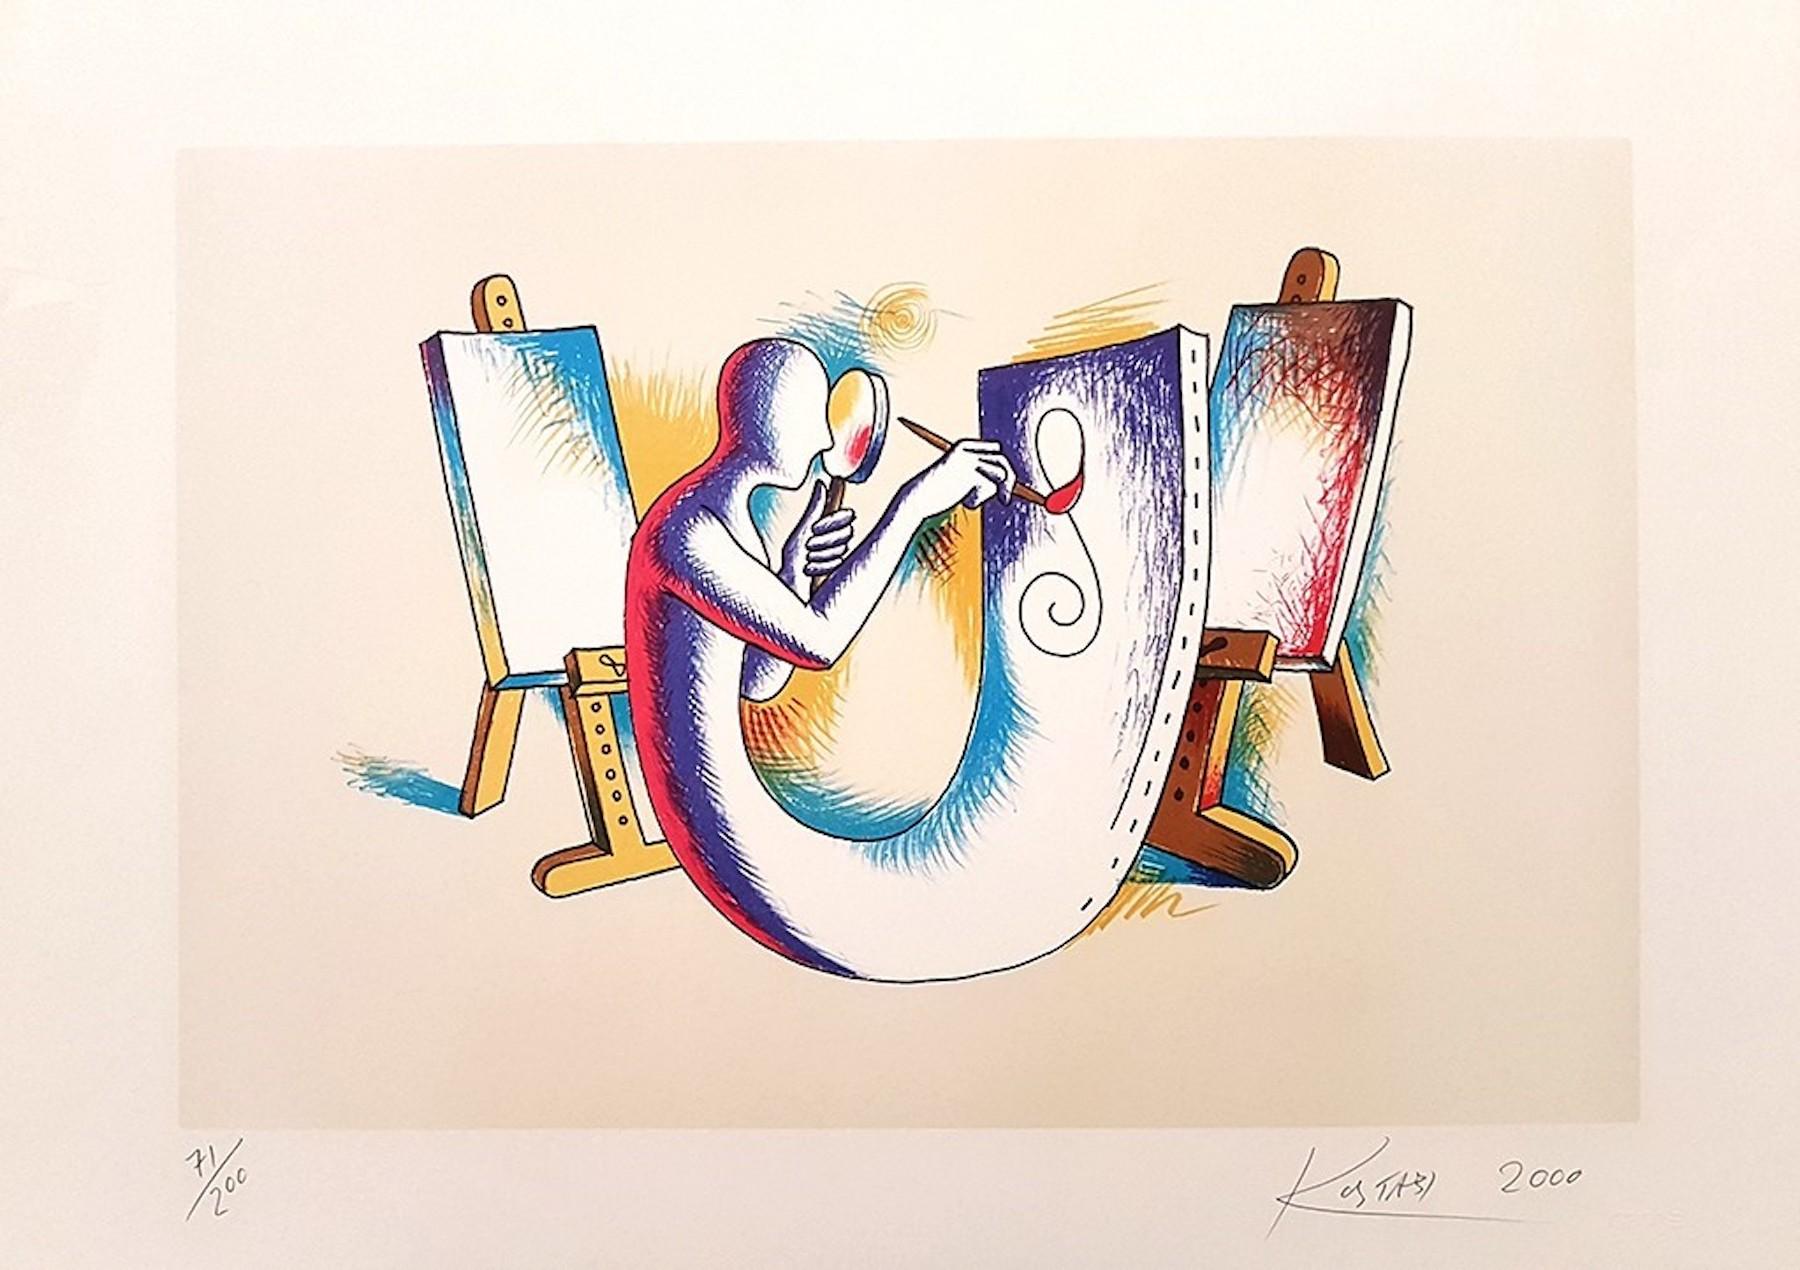 "The Painter's Atelier" is an original print realized by Mark Kostabi in 2000. The artwork is hand signed and dated. This is an edition of 200 prints.

Mark Kostabi (b. 1960) is an American artist. He studied drawing and painting at the California